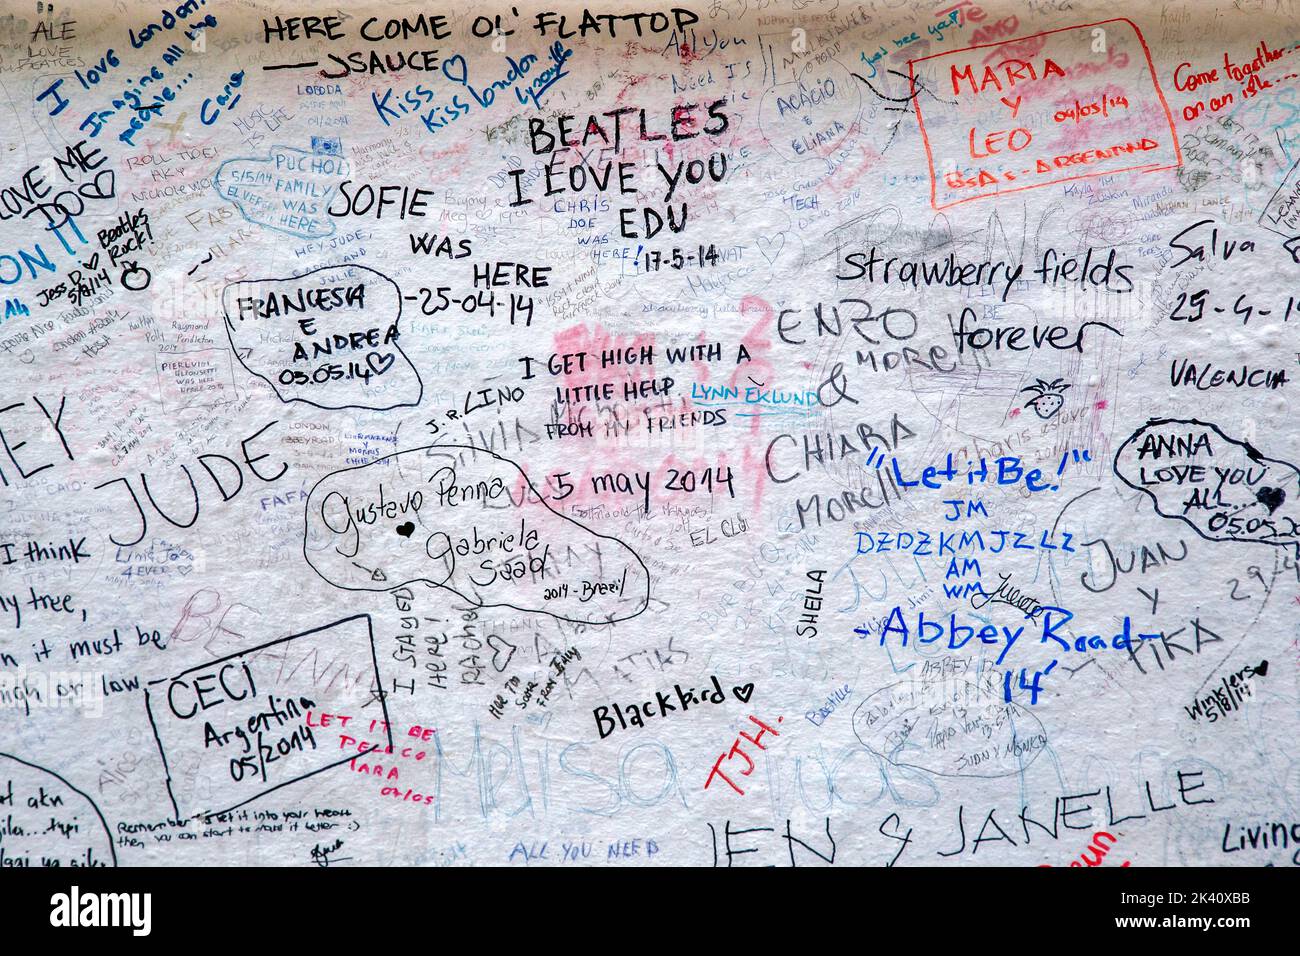 LONDON, GREAT BRITAIN - MAY 17, 2014:  This is part of the fence of Abby Road Studios with a graffiti of love to the Beatles. Stock Photo